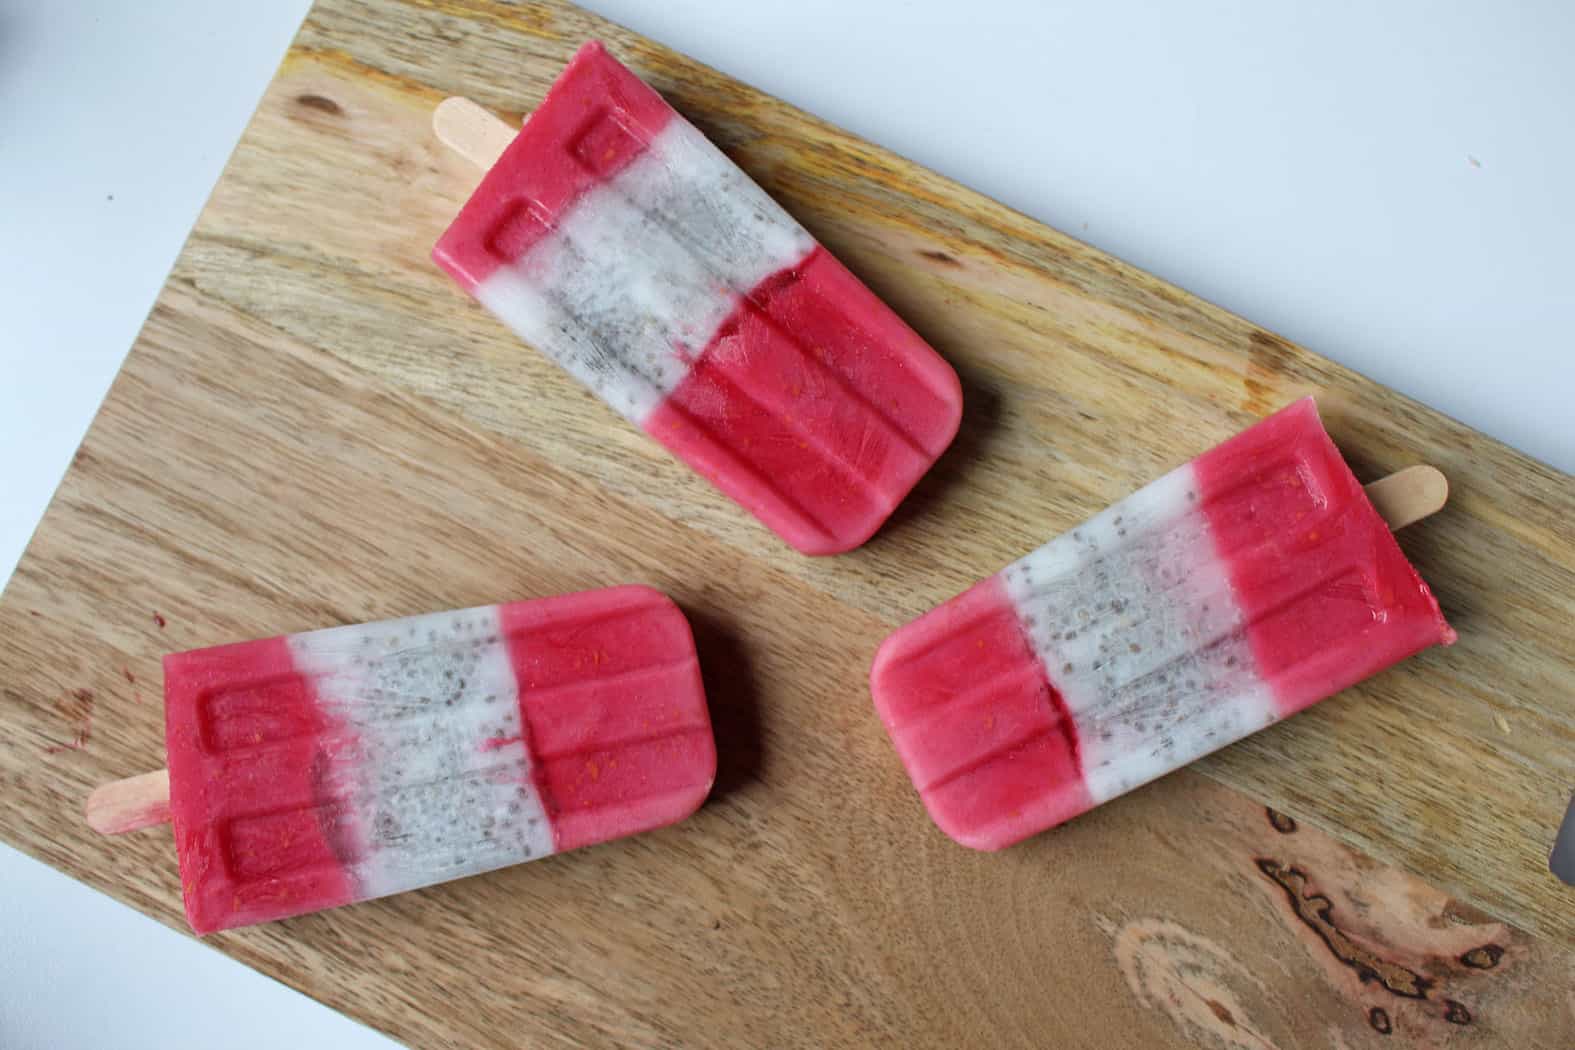 Superfood Popsicles6 10